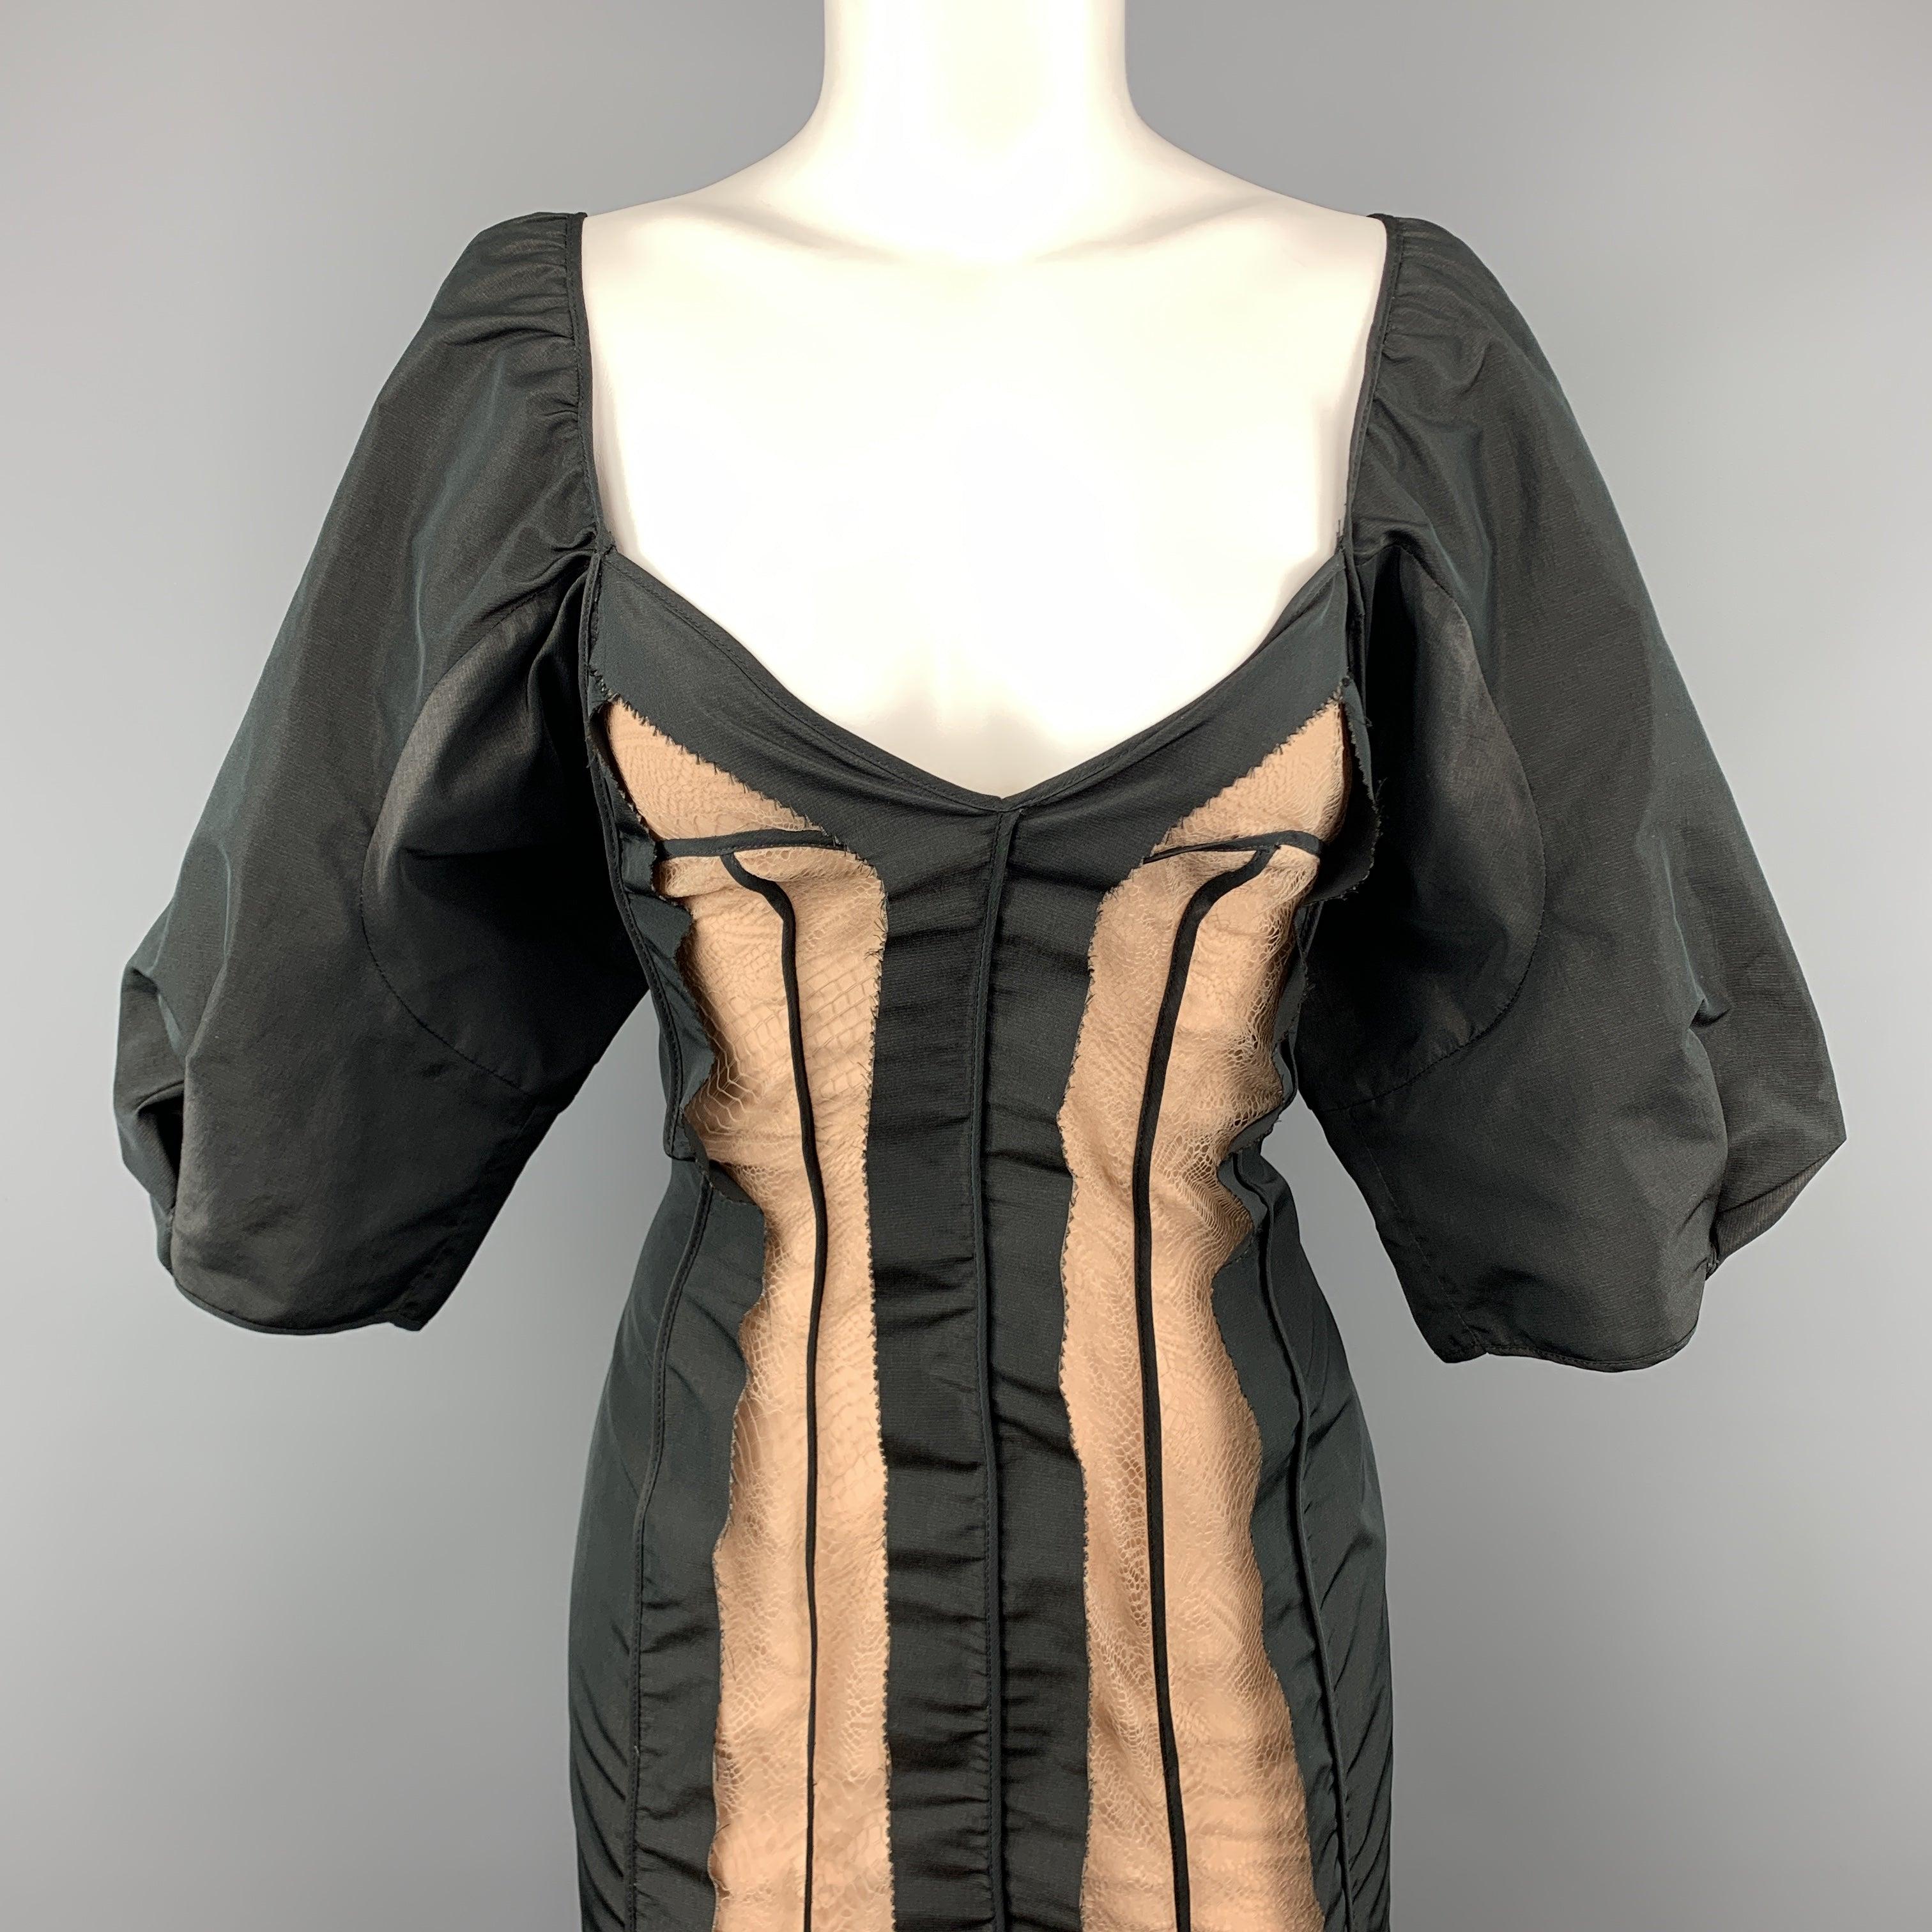 STELLA McCARTNEY cocktail dress comes in a black silk blend taffeta with a sweetheart portrait neckline, inside out effect raw seam constructions, beige lined lace mid panel, and balloon sleeves. Made in Italy.Excellent Pre-Owned Condition.